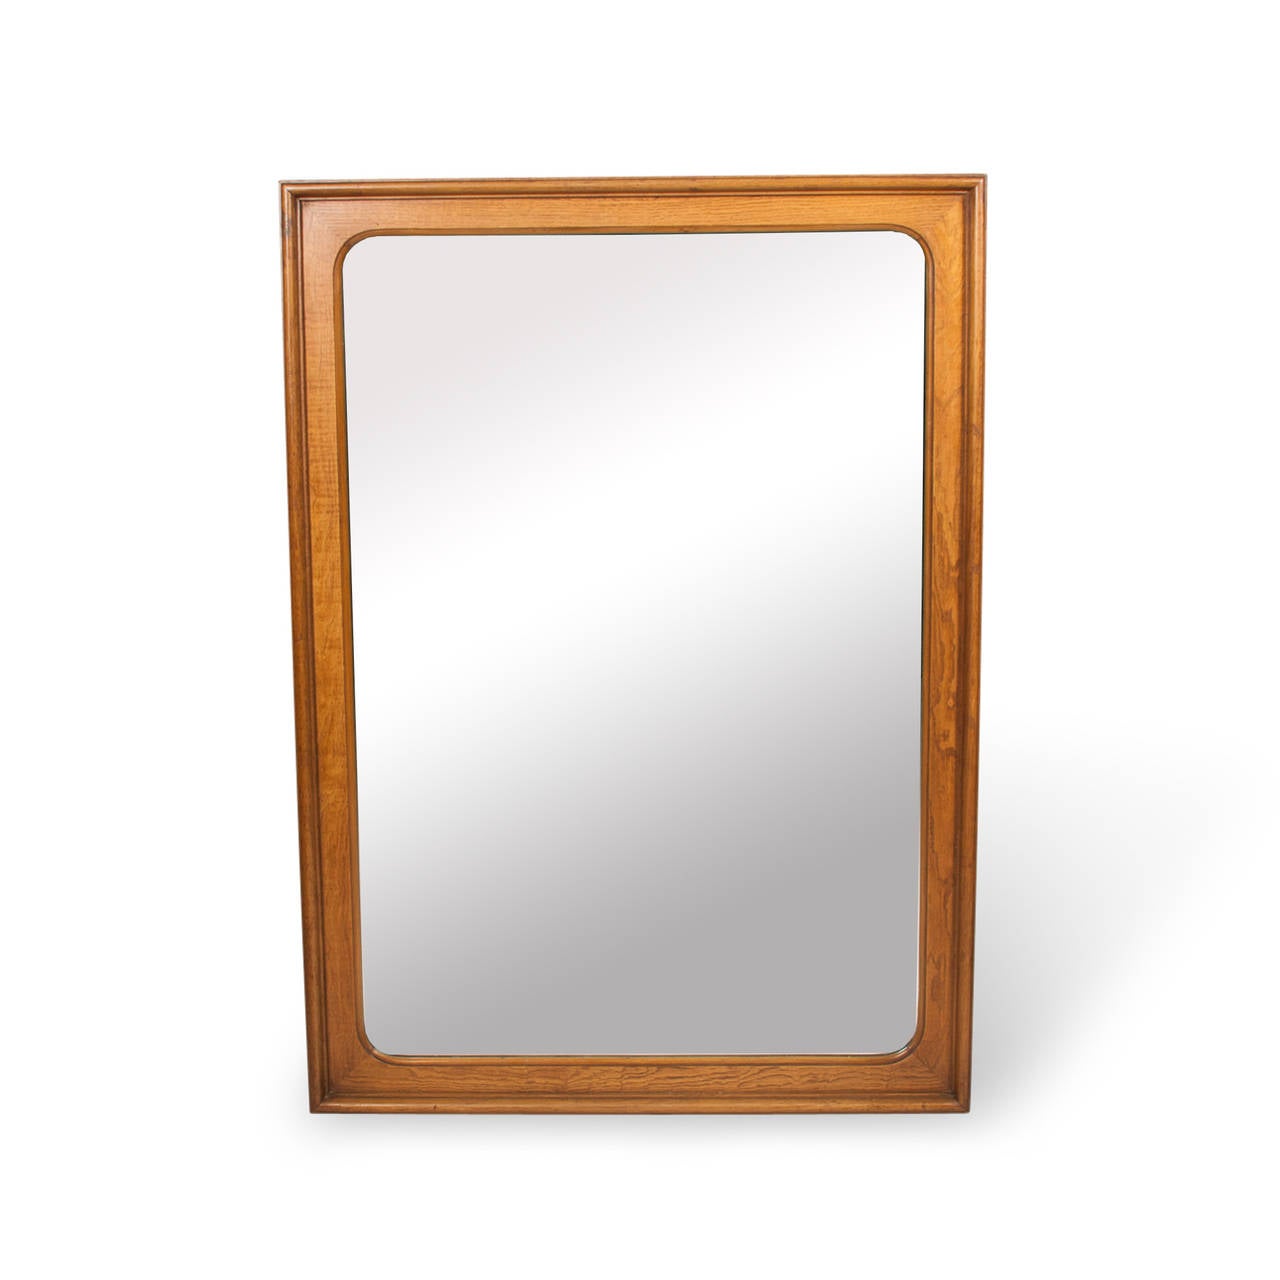 Maple rectangular frame mirror, the inside corners of the frame having a radius edge, American, 1960s. 42 x 30 inches, depth 1 1/2 in.